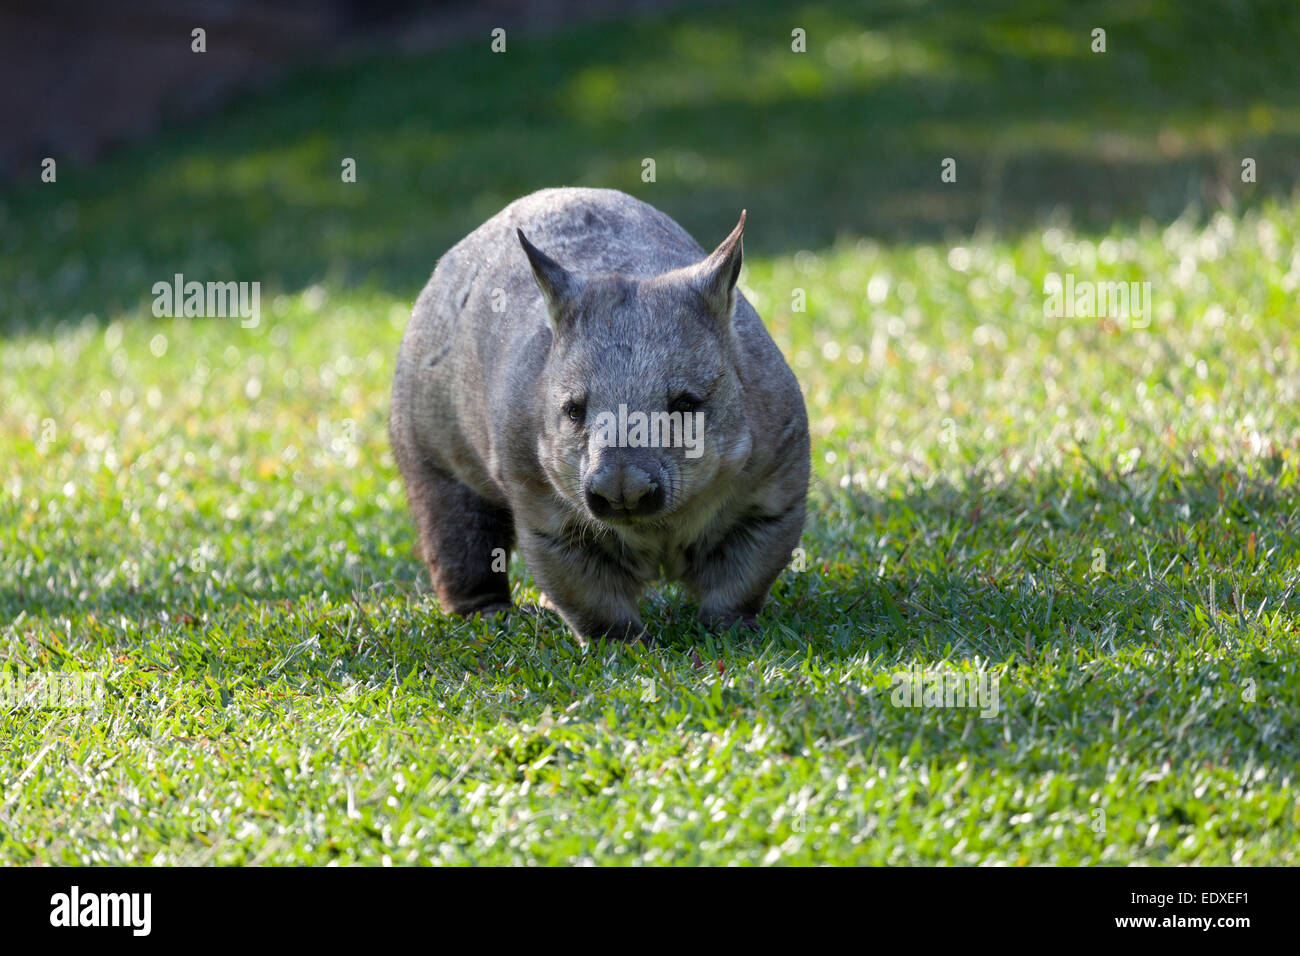 Southern Hairy-nosed Wombat, Queensland, Australia Stock Photo